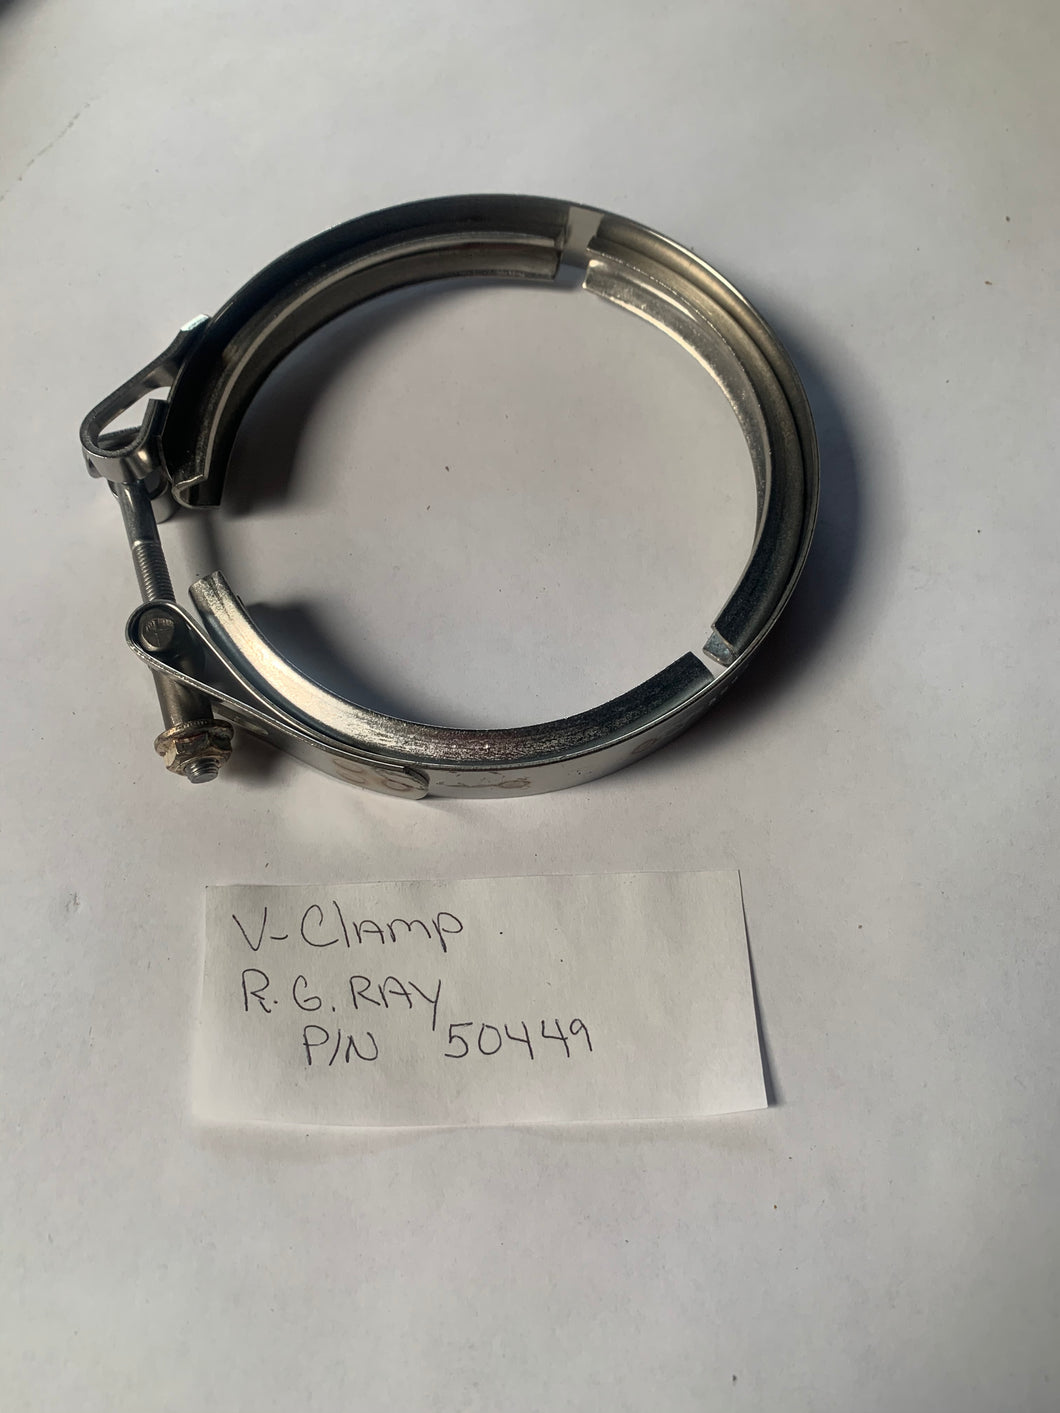 50449 - R.G. Ray - V-Clamp